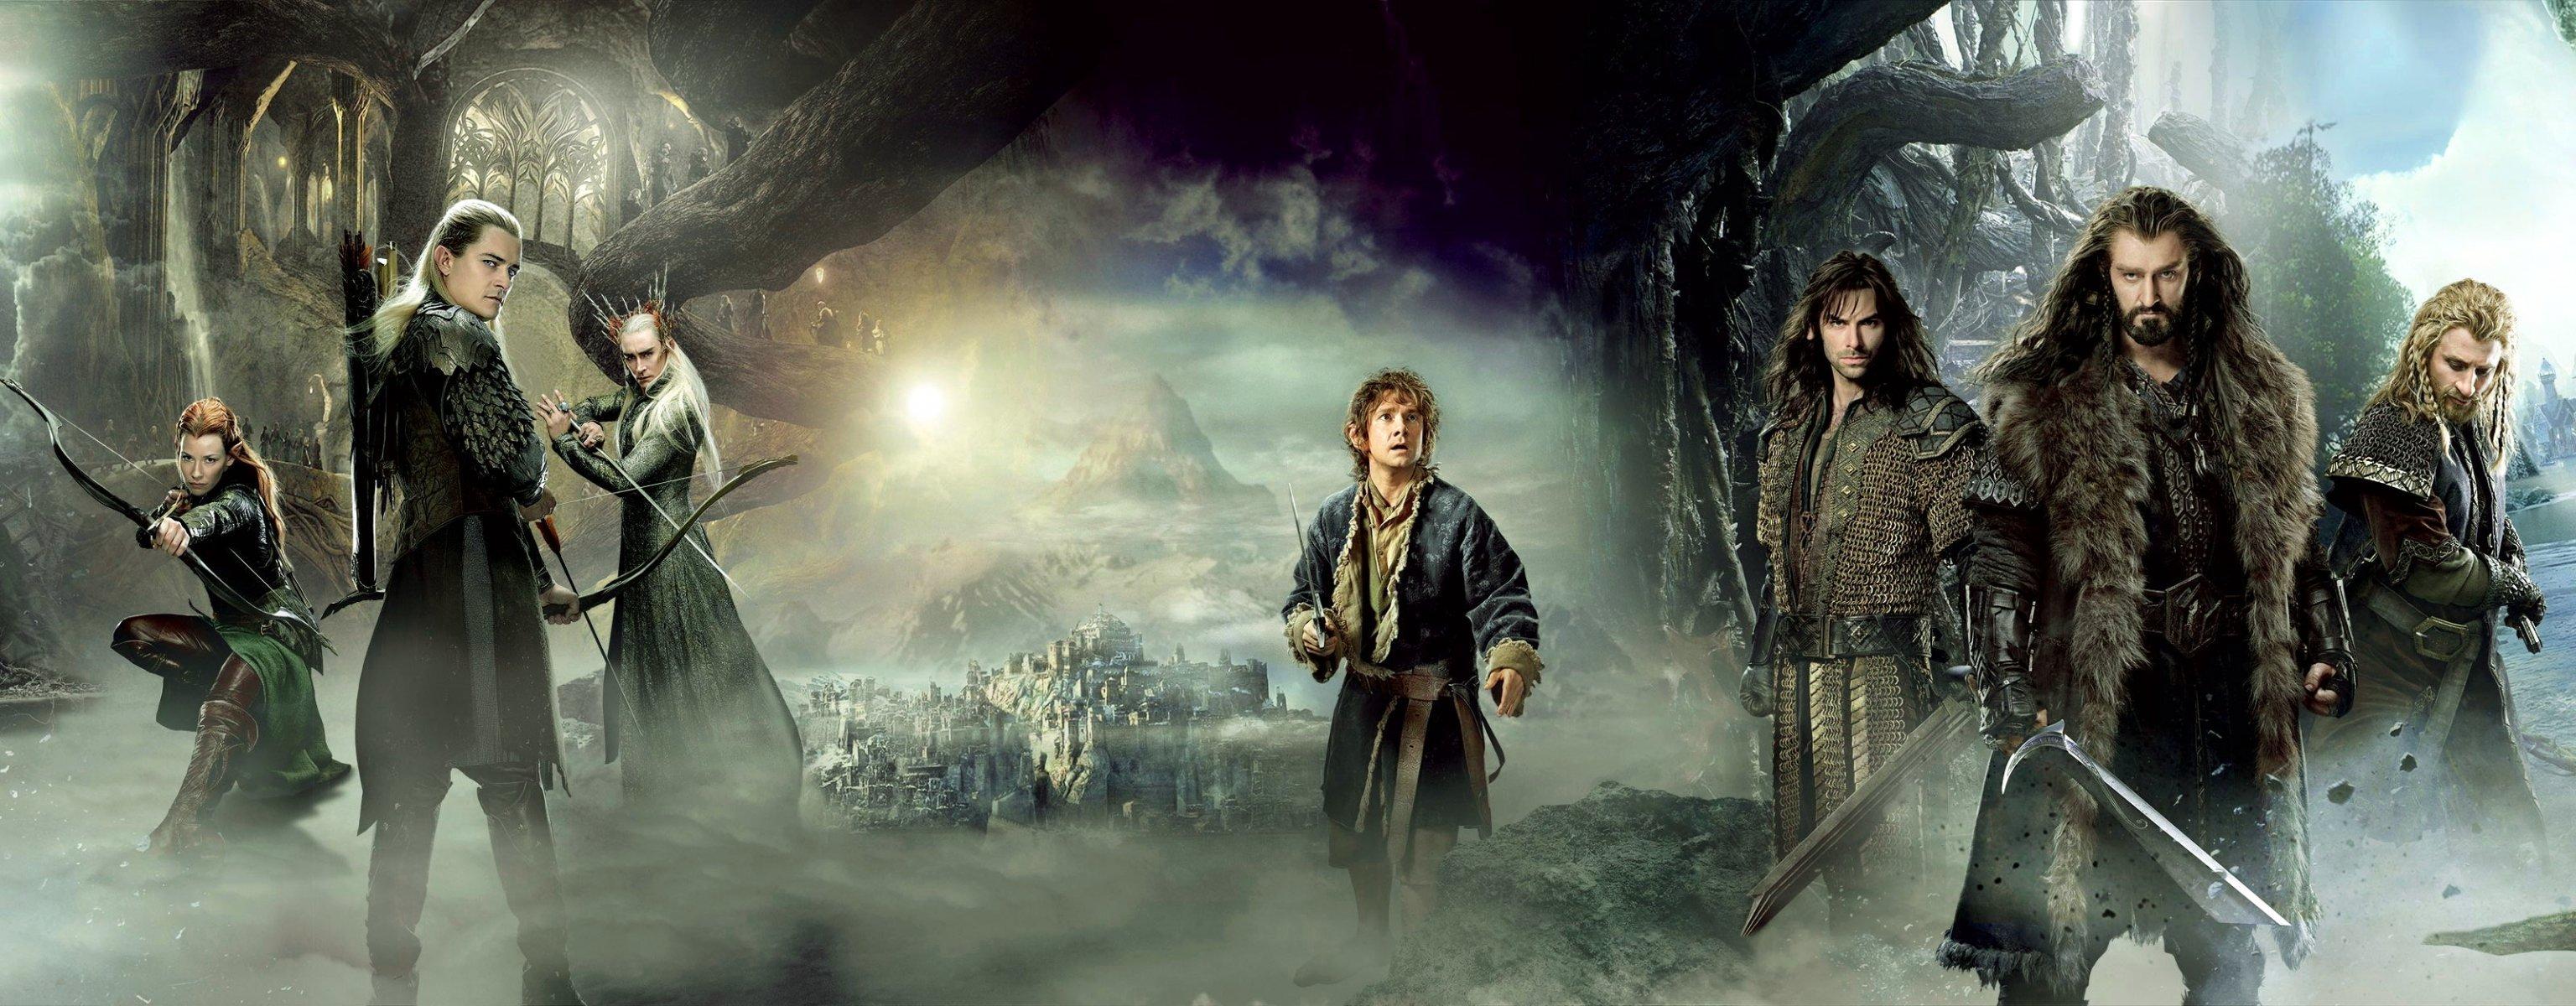 the hobbit or there and back again the hobbit: the desolation